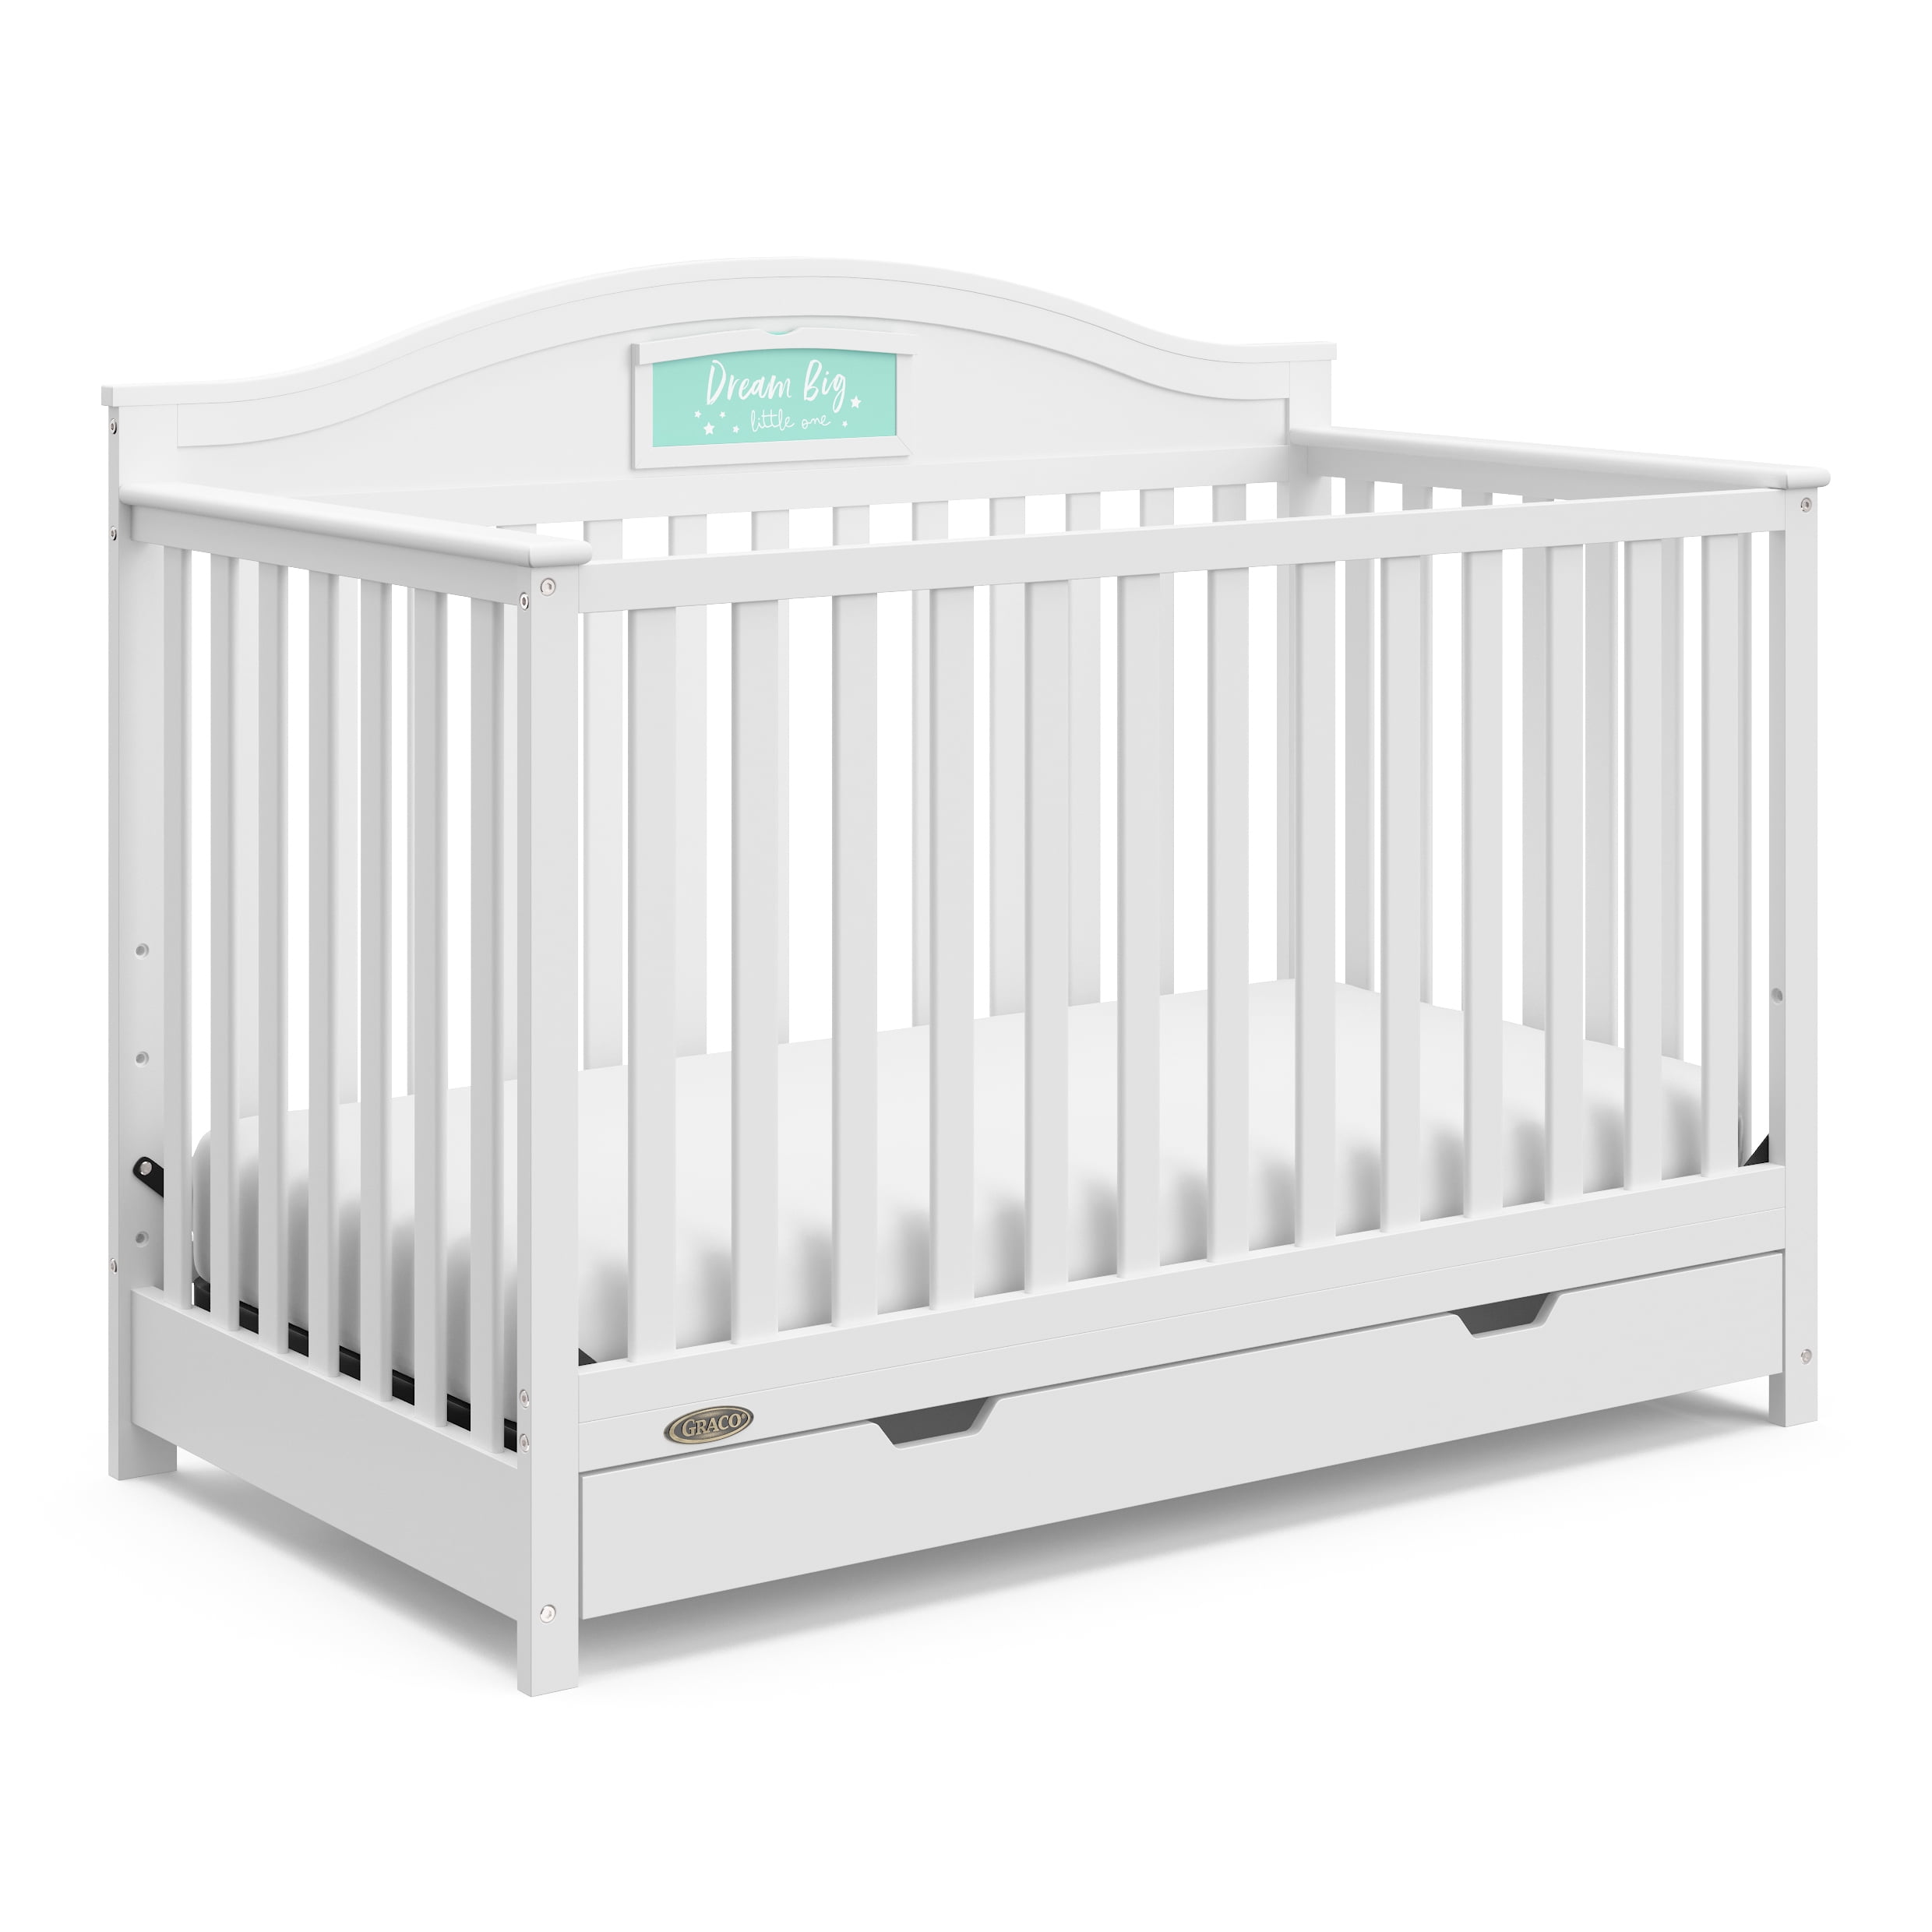 Graco Story 5-in-1 Convertible Baby Crib with Drawer, White - image 1 of 18